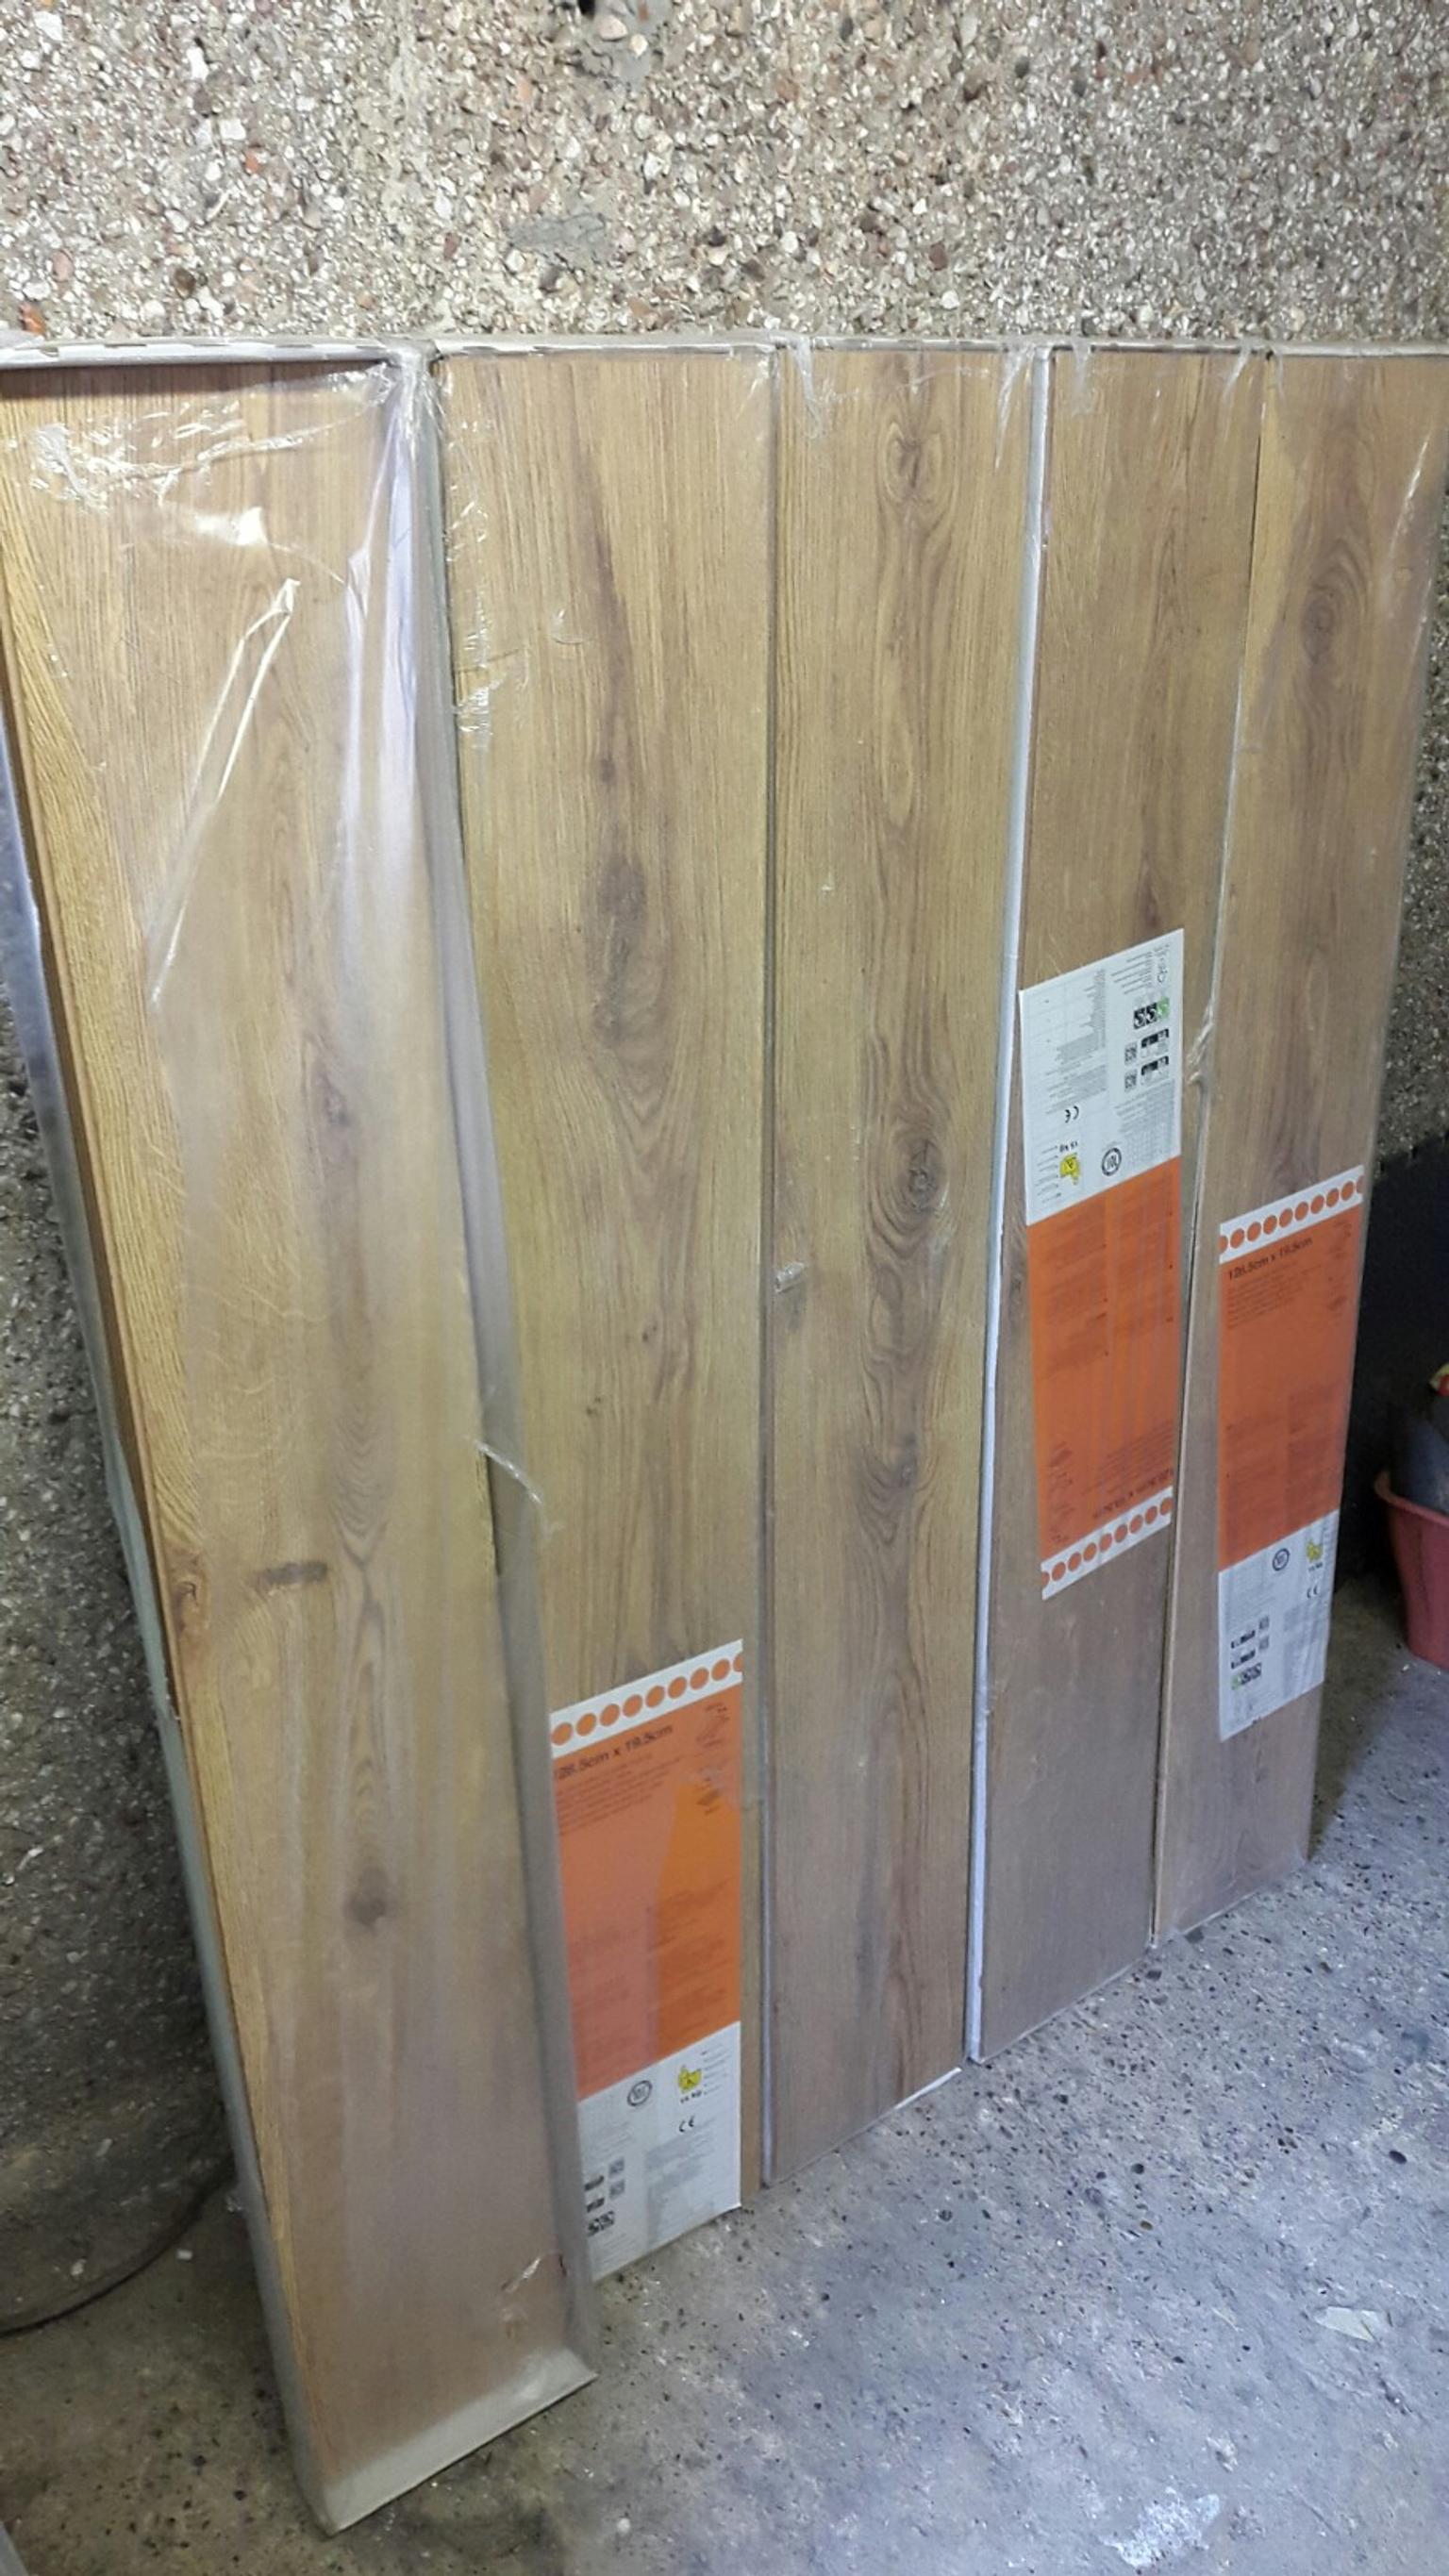 At jewson we stock an extensive range of flooring accessories and skirting board that is s Oak Skirting Bq